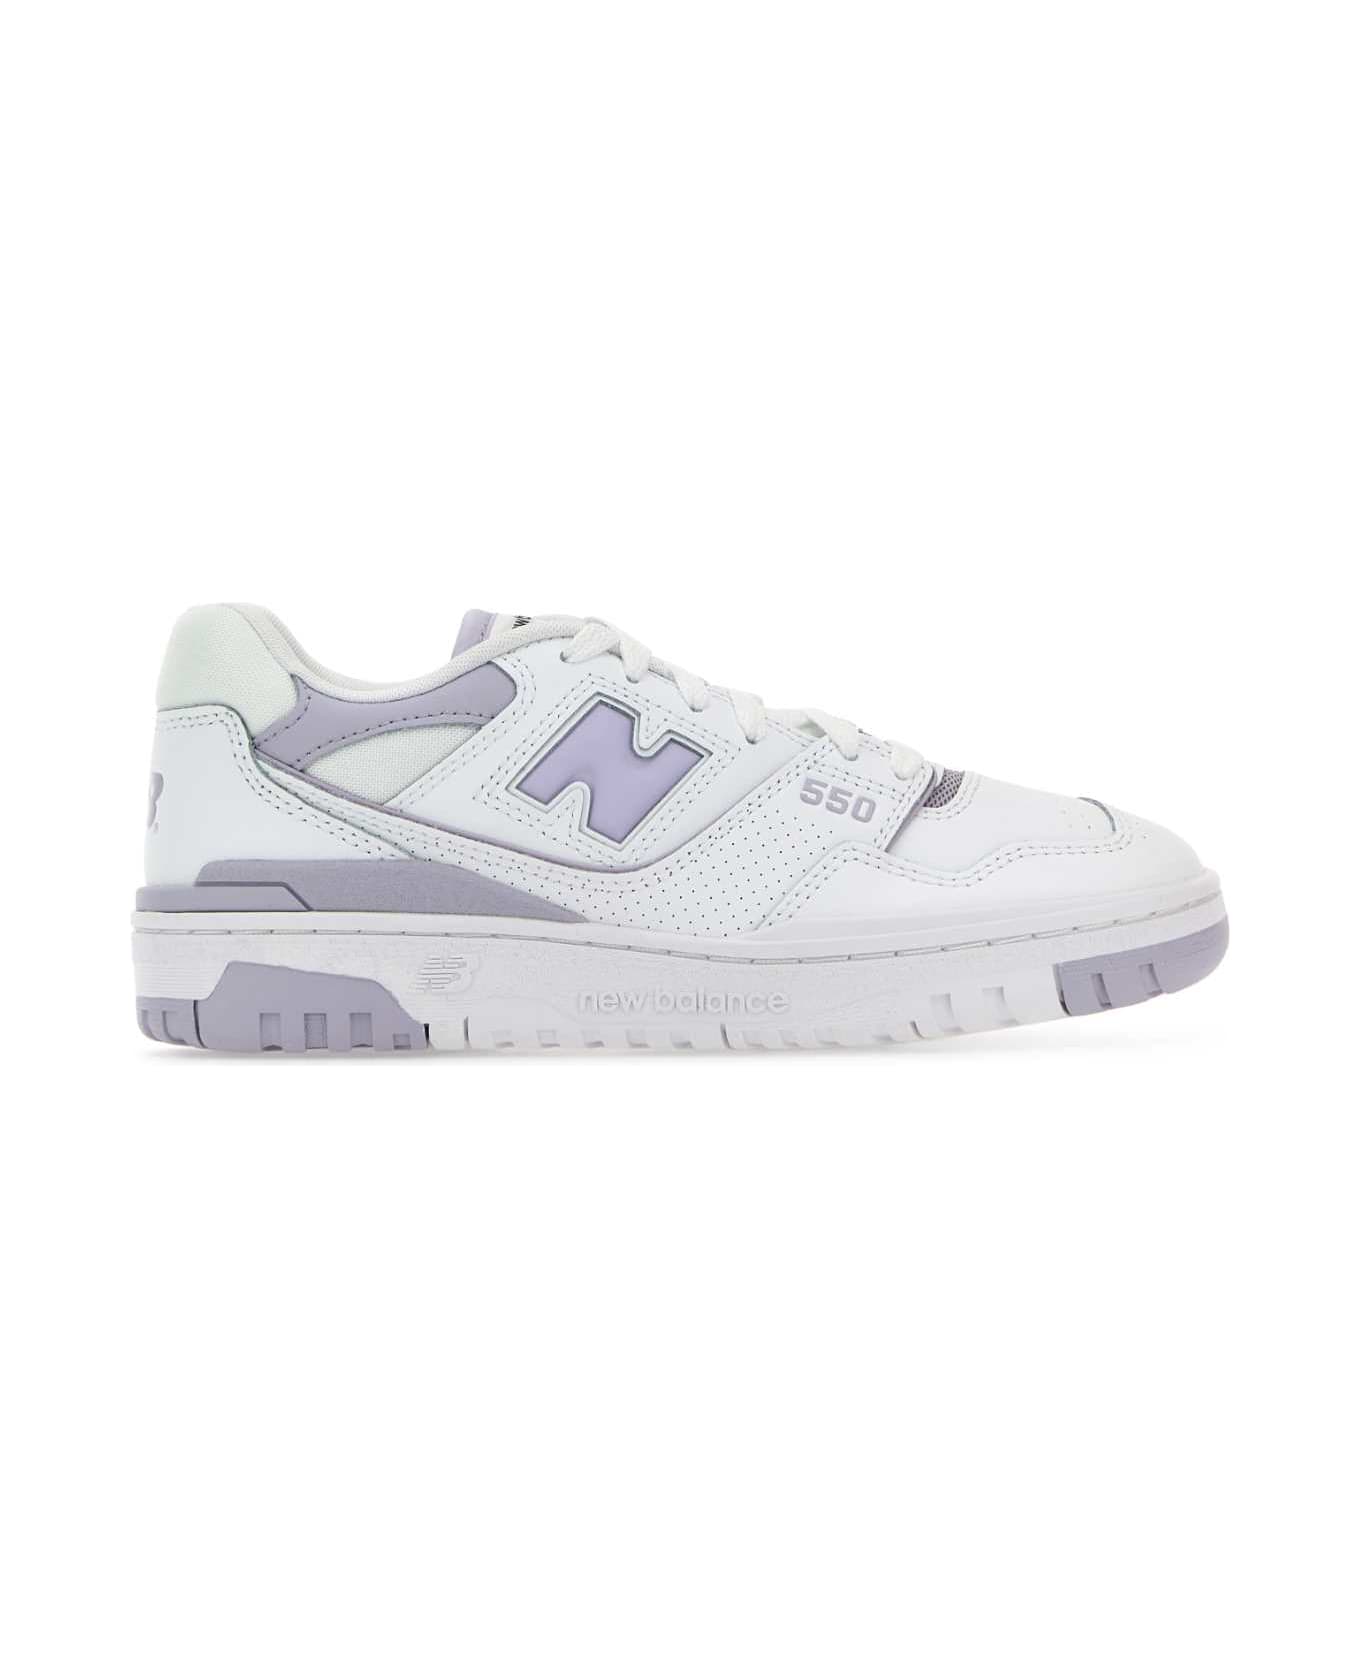 New Balance Two-tone Leather 550 Sneakers - WHITE